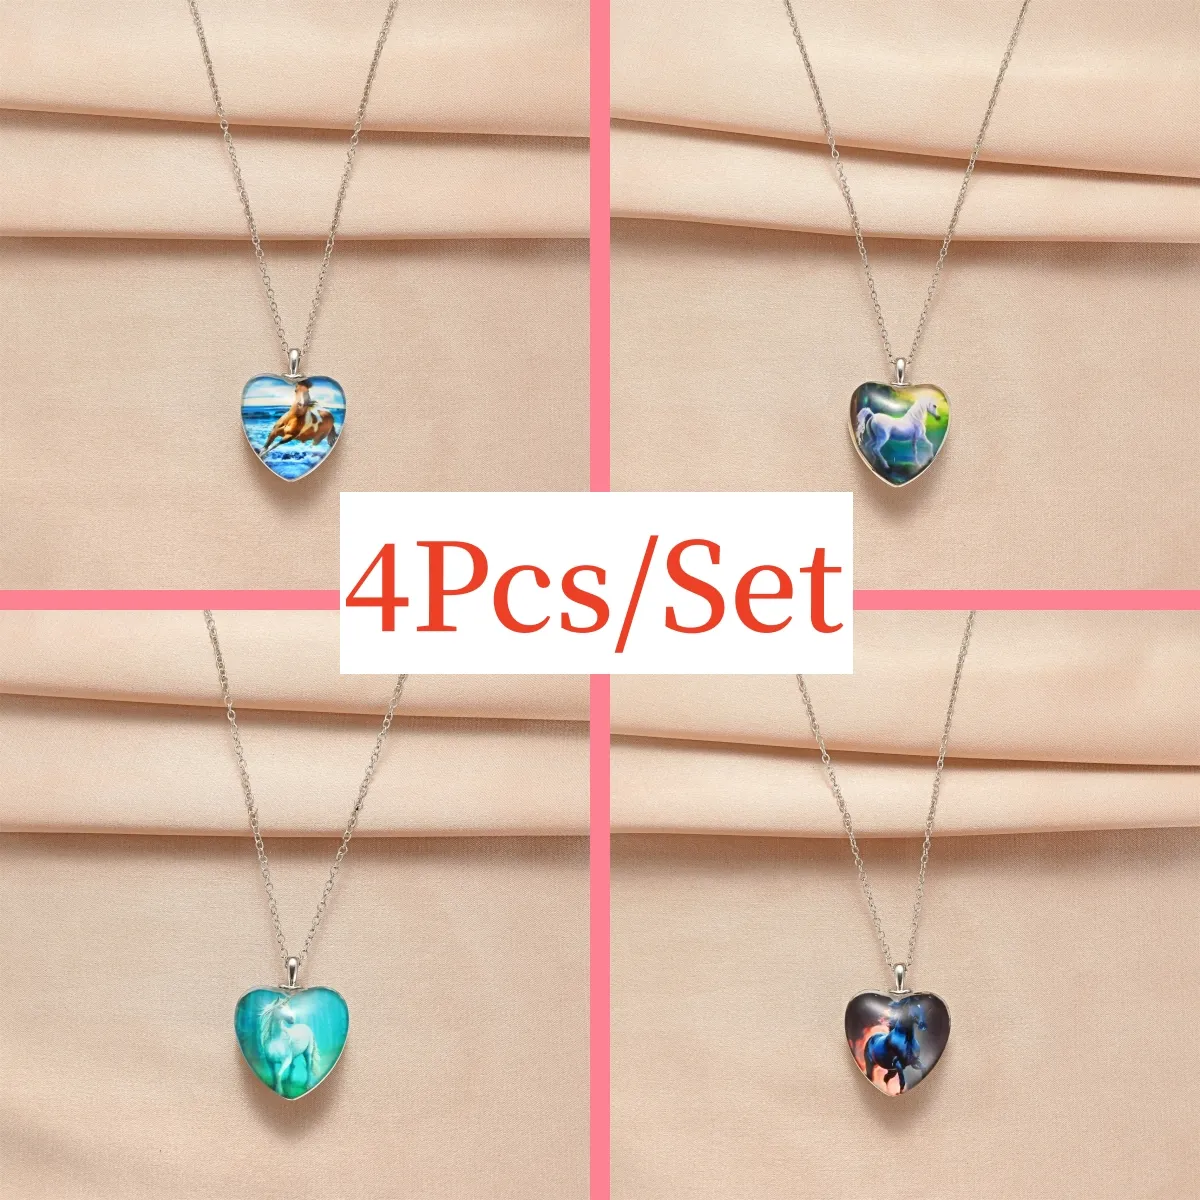 4pcs Trendy Cute Horse Necklaces, Creative Pendant Necklace, Cute  Heart-shaped Pendant Necklace, Party Jewelry, Holiday Birthday Gift For  Friends